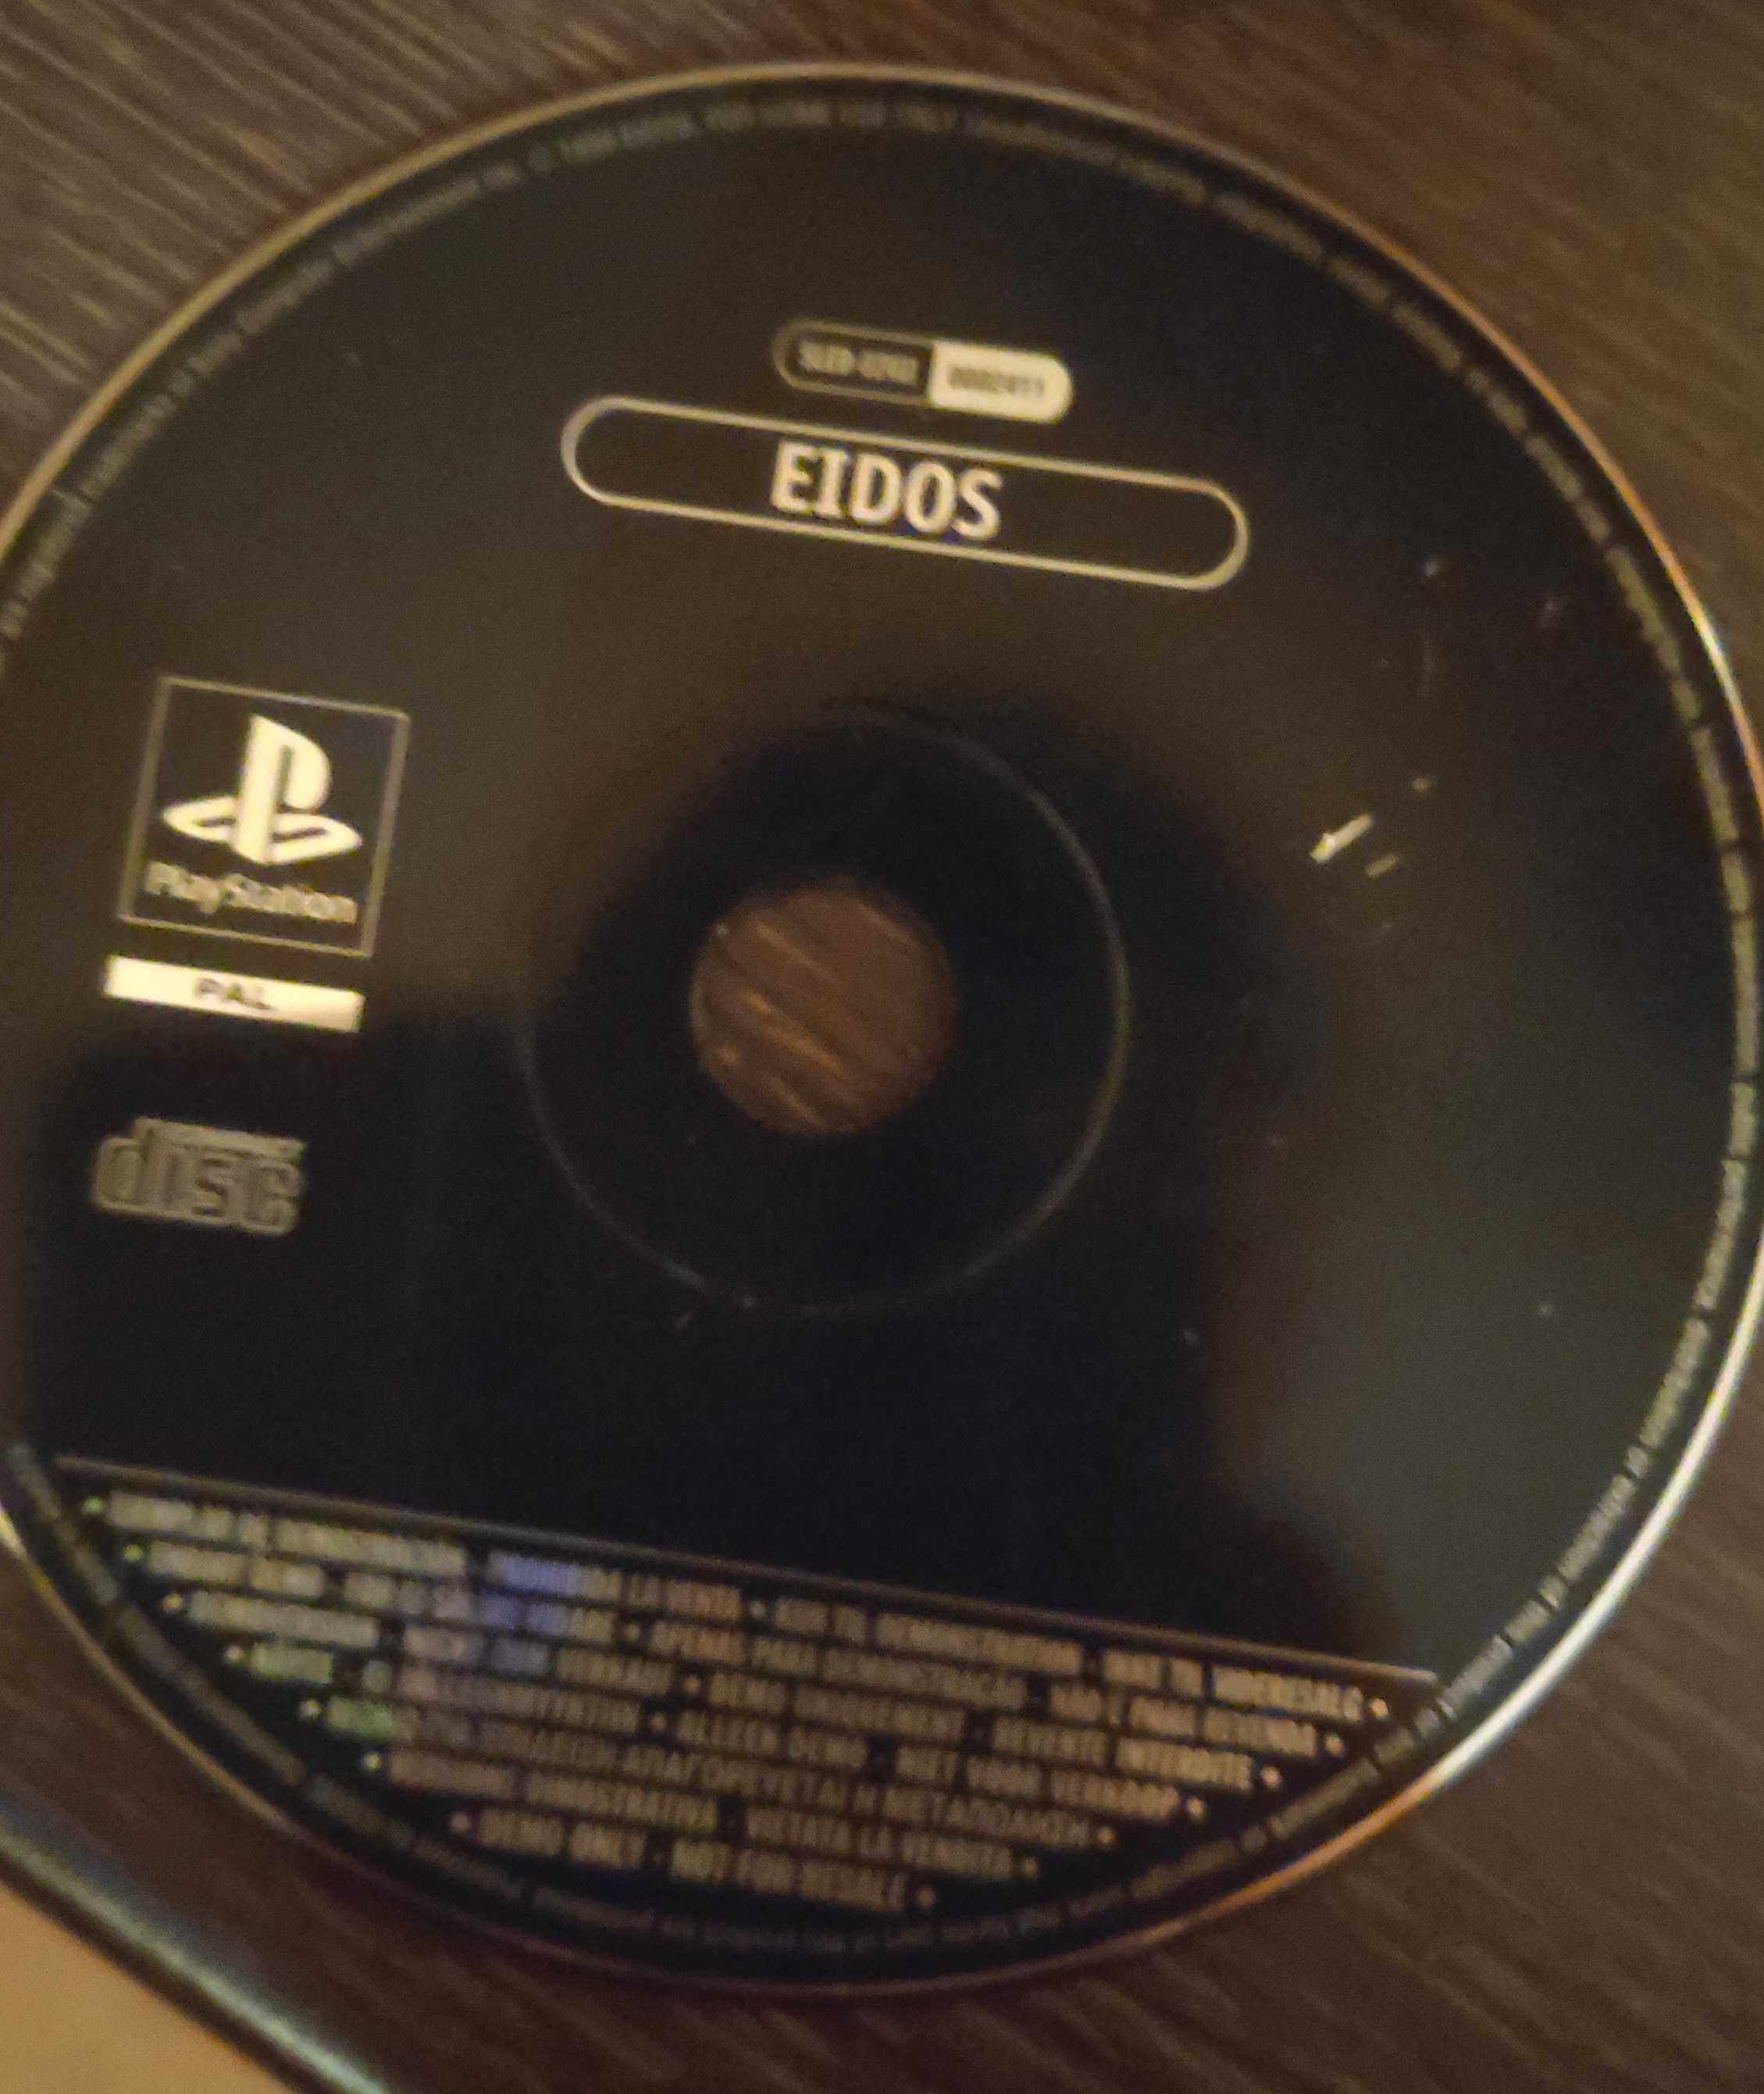 PALFR - PlayStation Demo Disc - M6 Eidos Tomb Raider 4 - SLED-02411 : Eidos  : Free Download, Borrow, and Streaming : Internet Archive